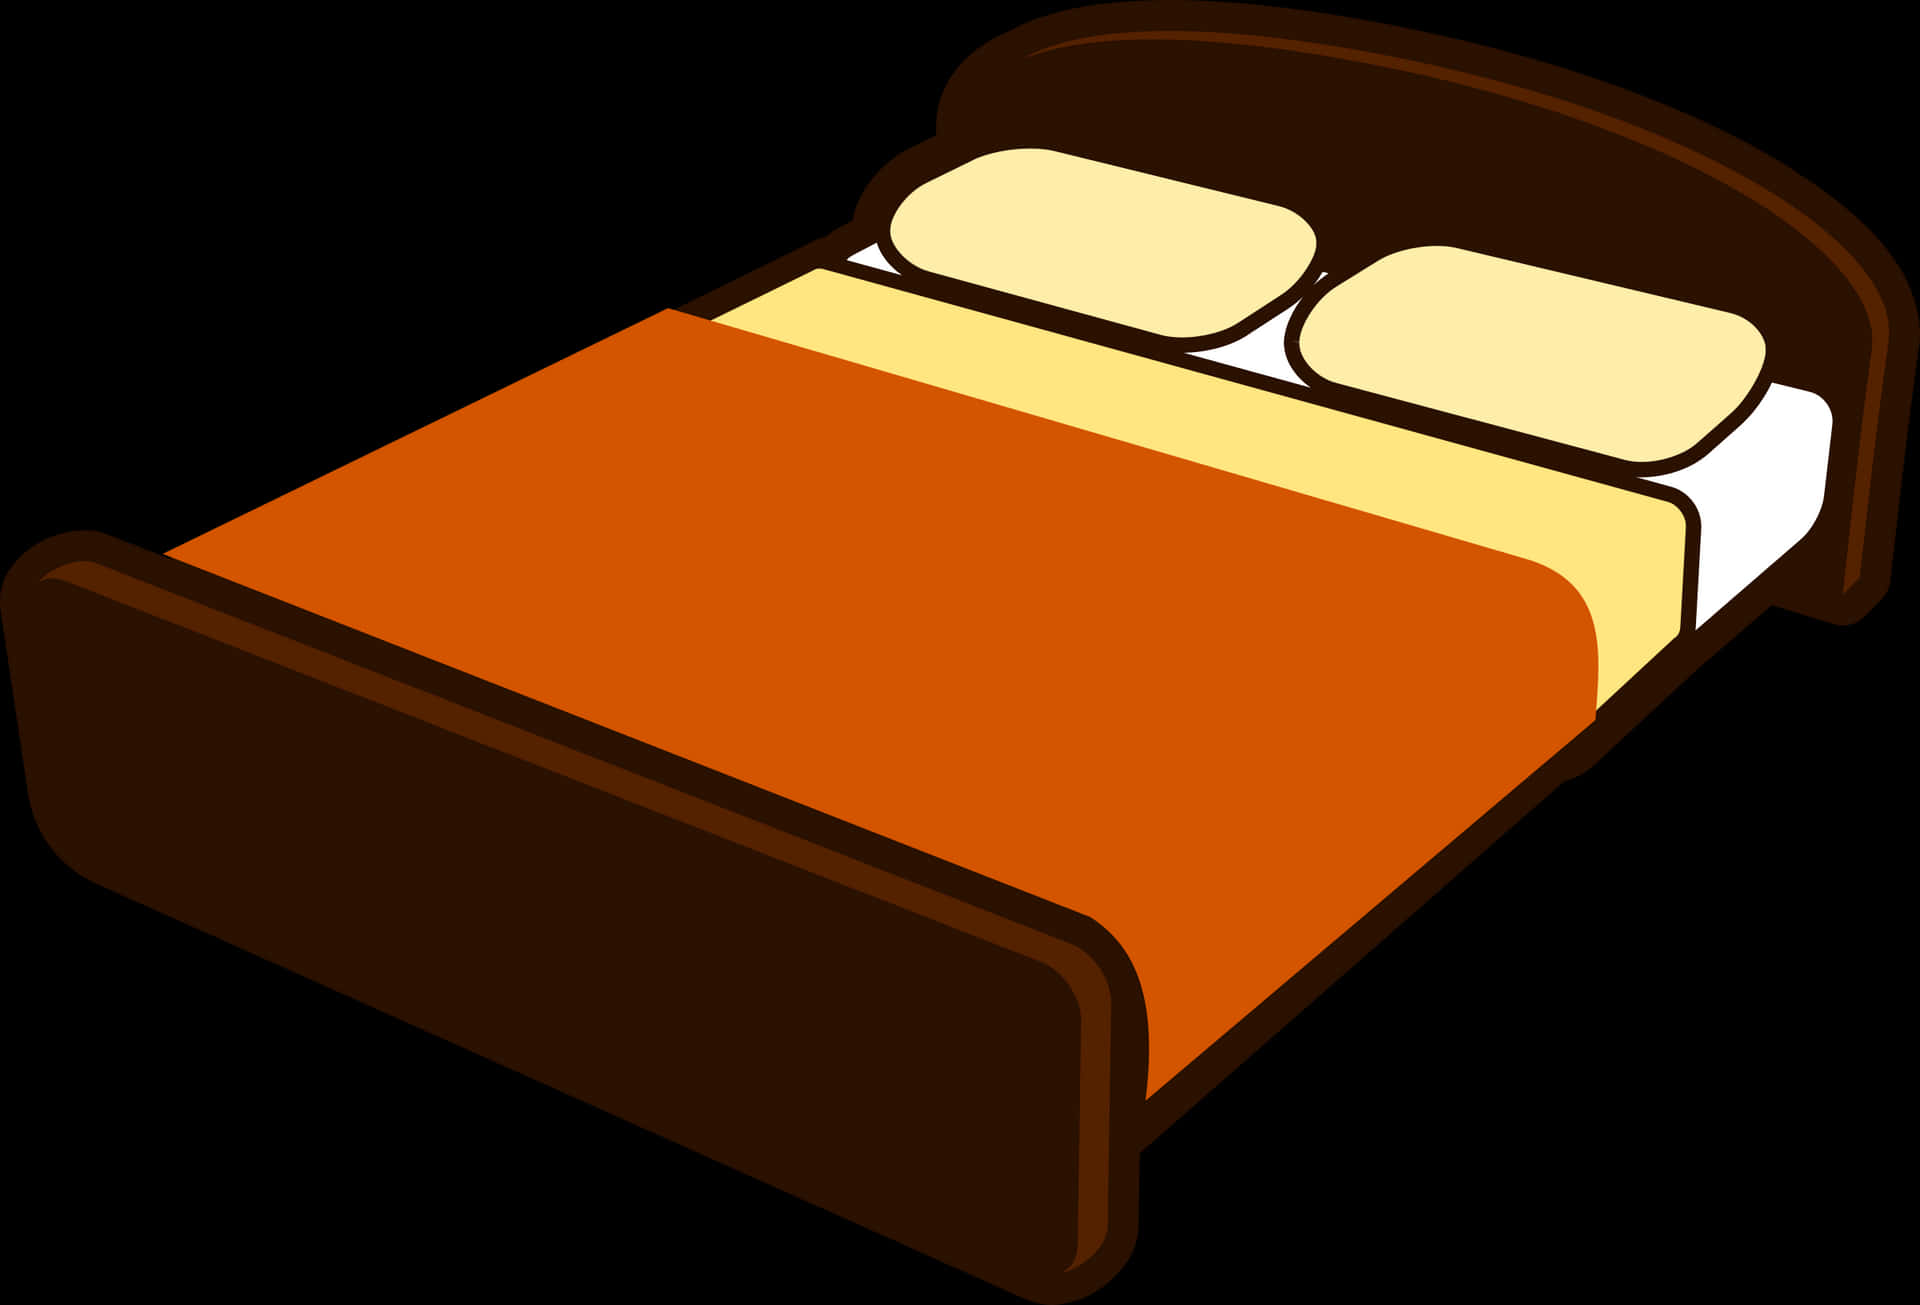 Cartoon Style Double Bed PNG